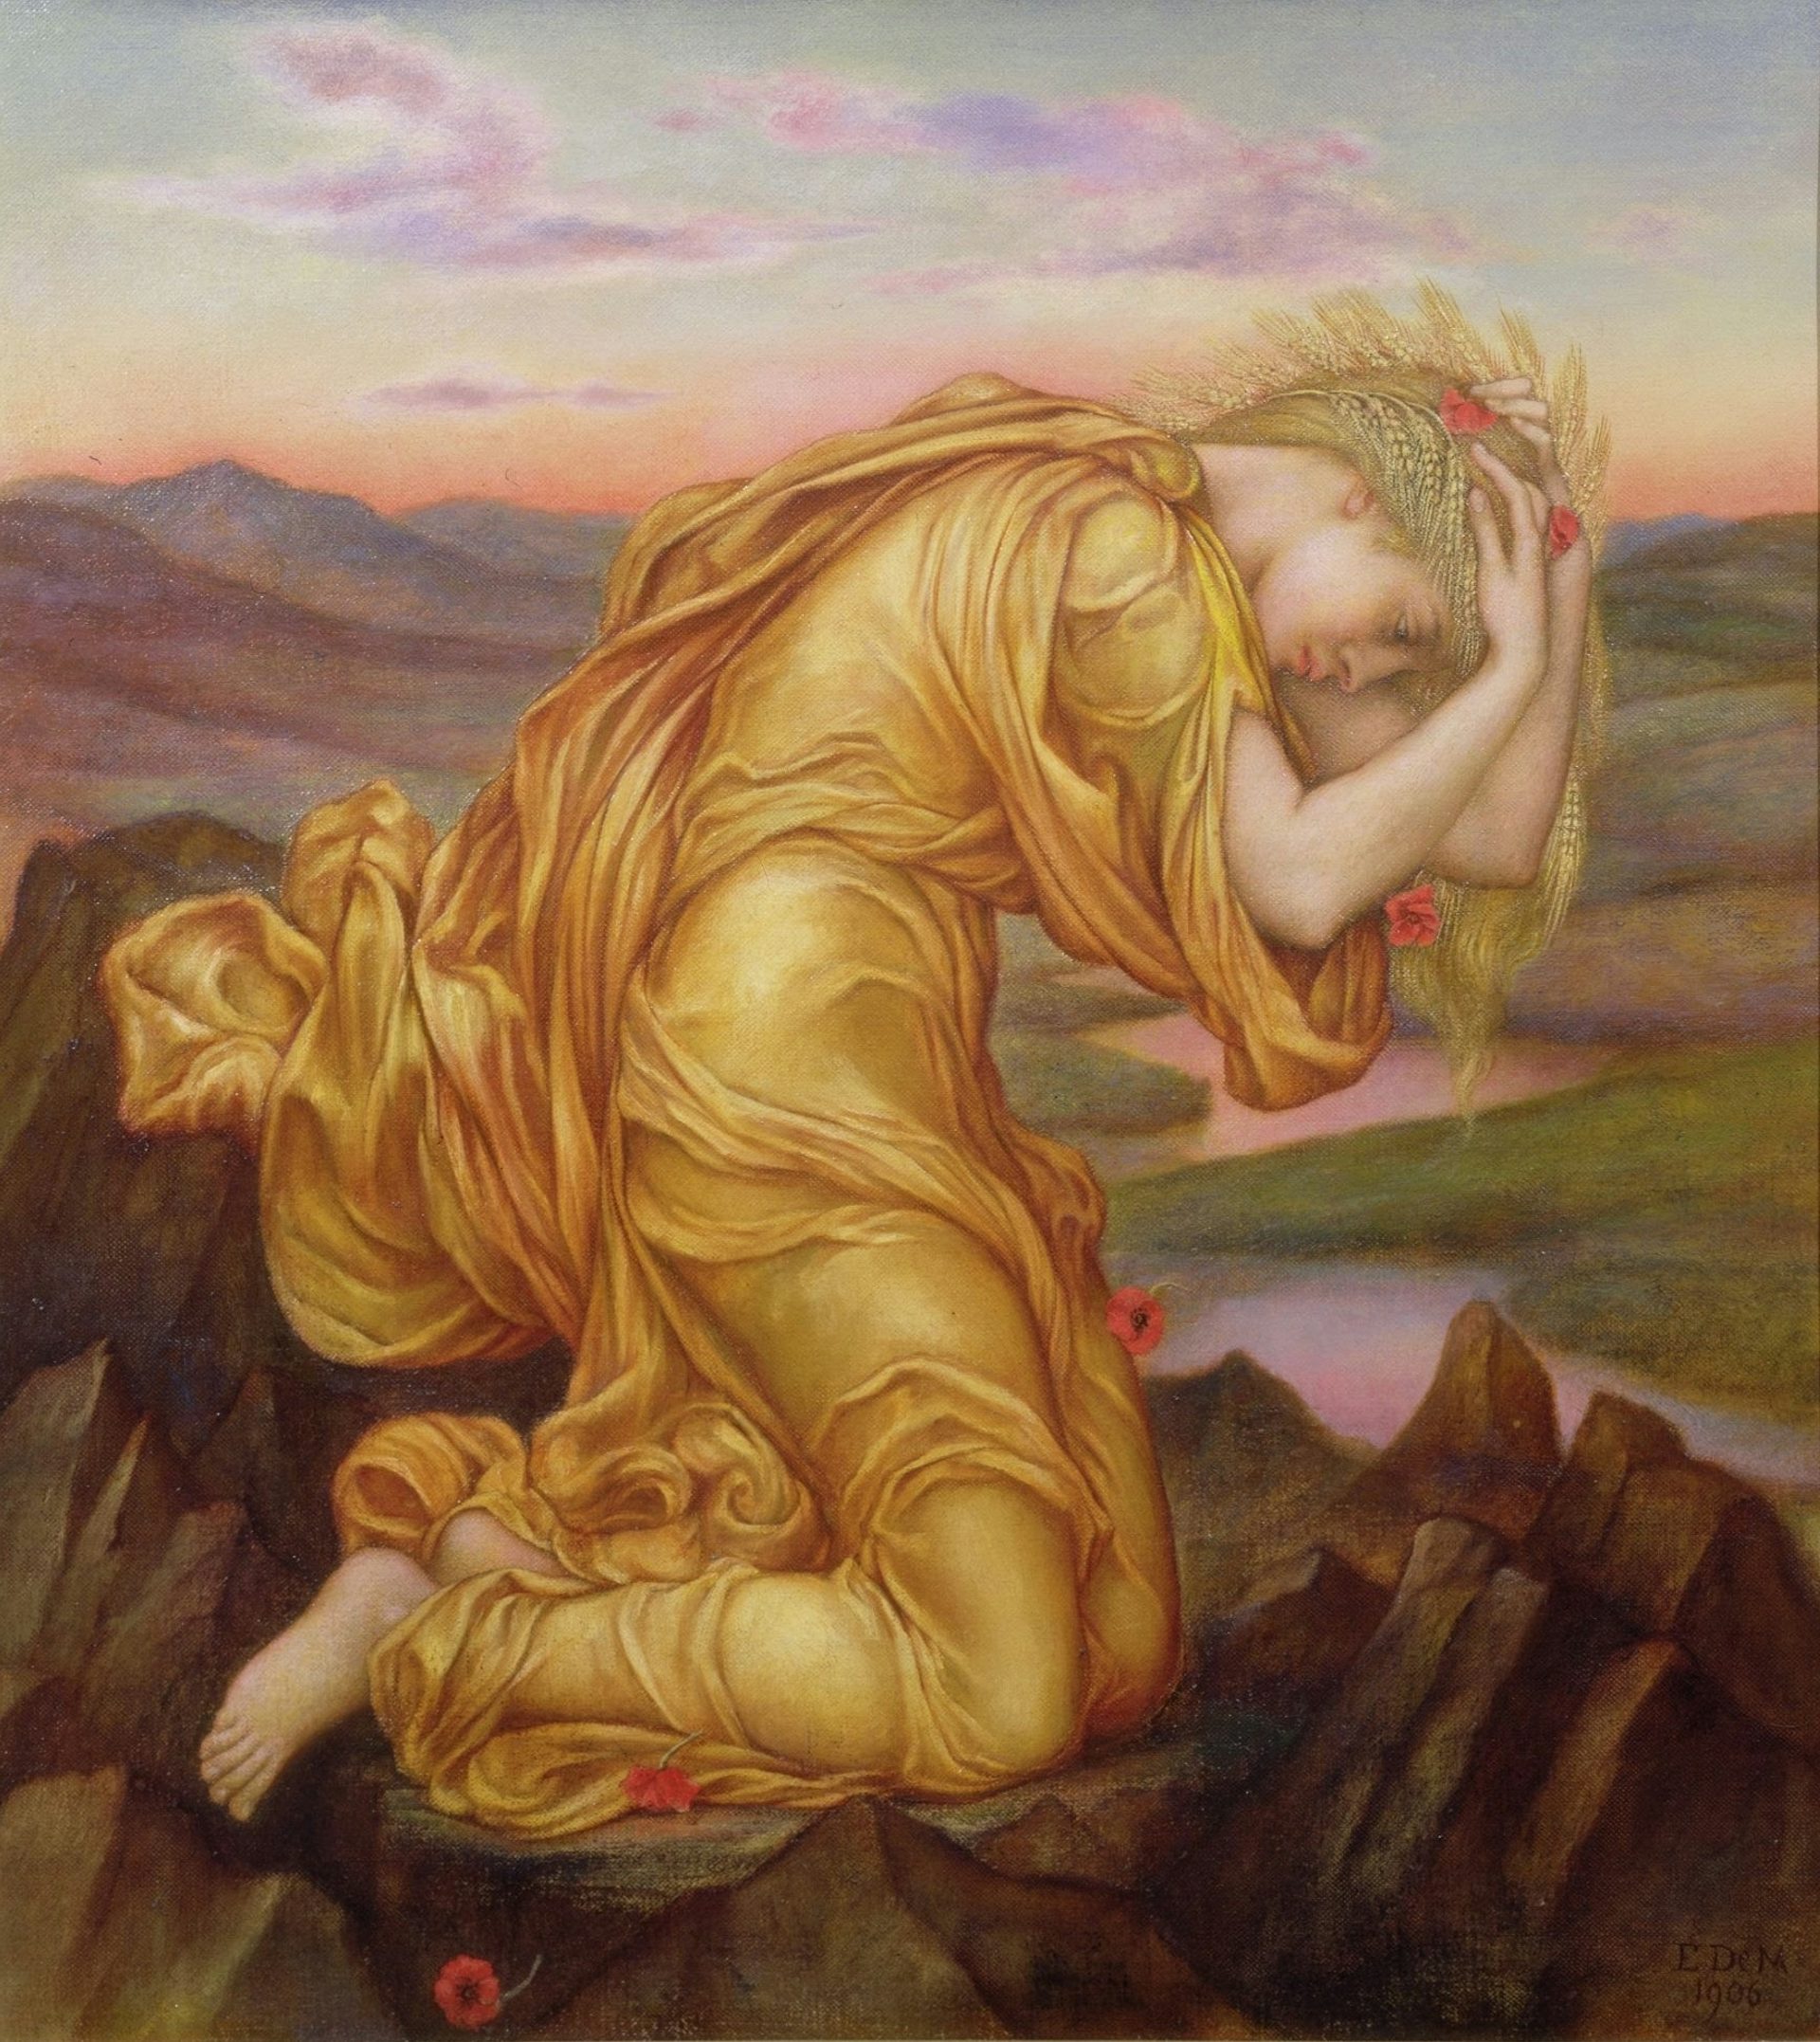 Demeter Mourning Persephone by Evelyn De Morgan